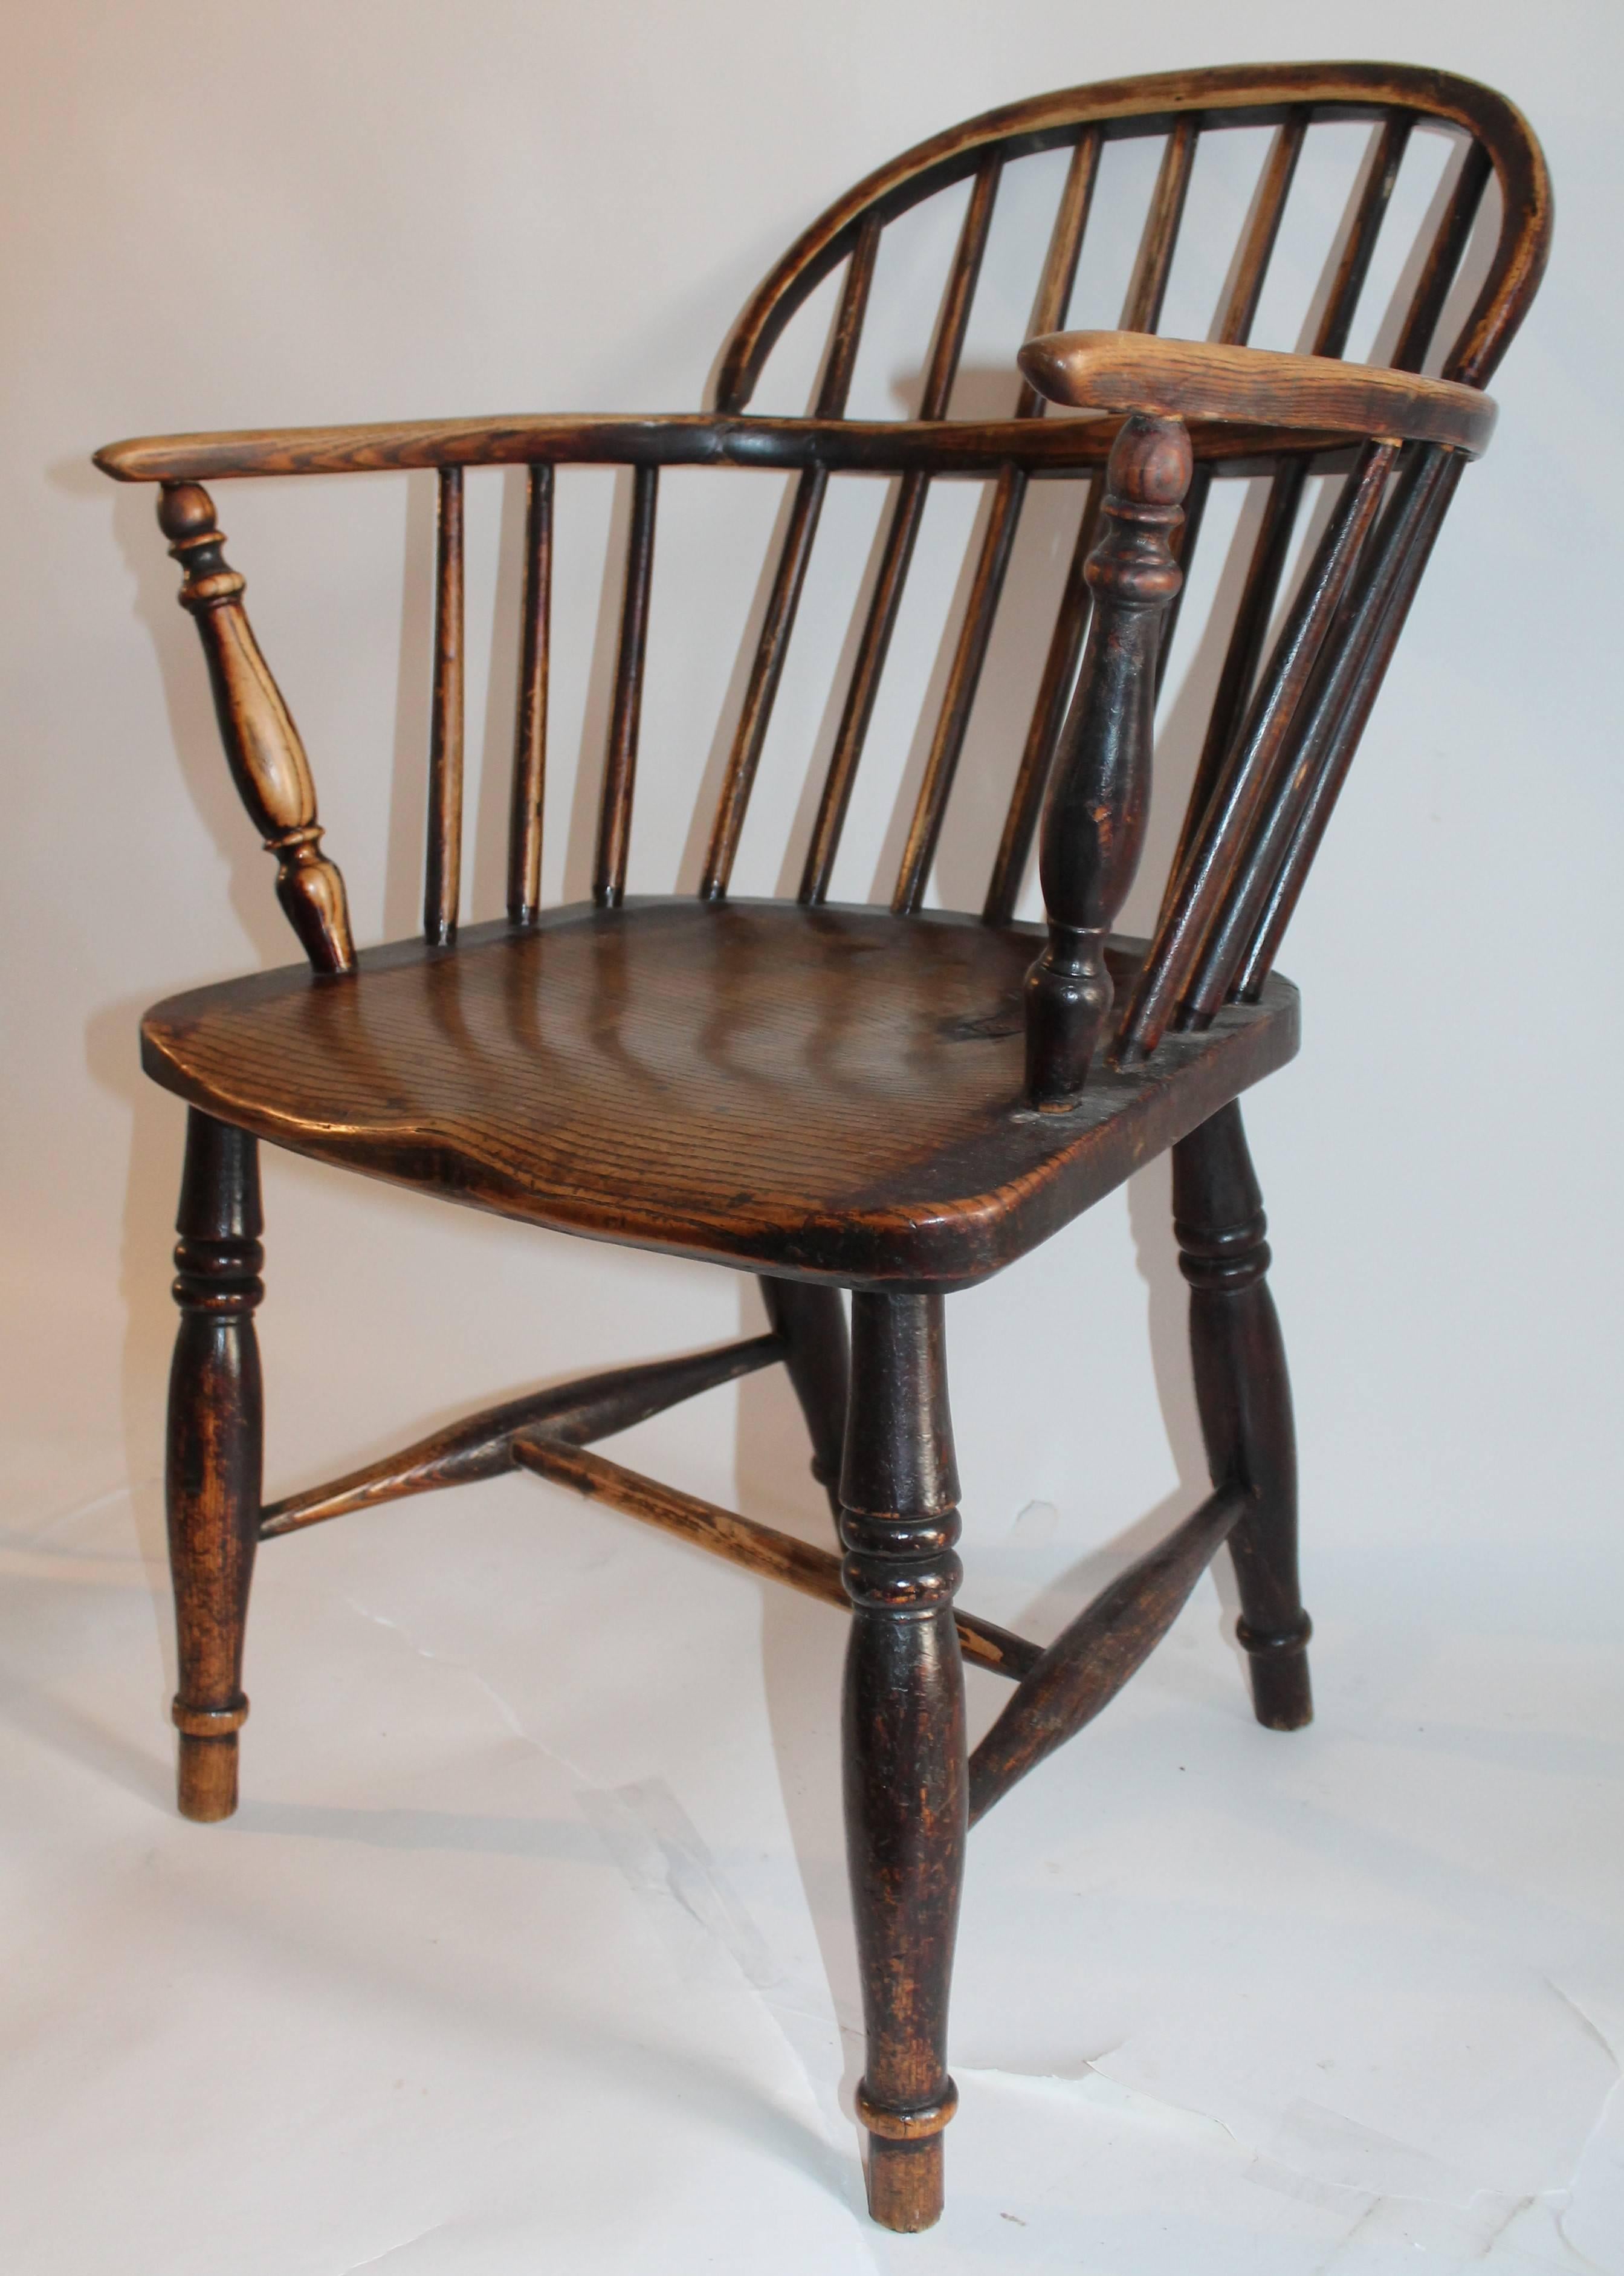 This early English 19Th century Windsor chair has been tightened for maximum comfort and is in good condition. This Windsor chair is in excellent used condition and has wear consistent with age and use. The rounded back seat height is 16.5 inches.